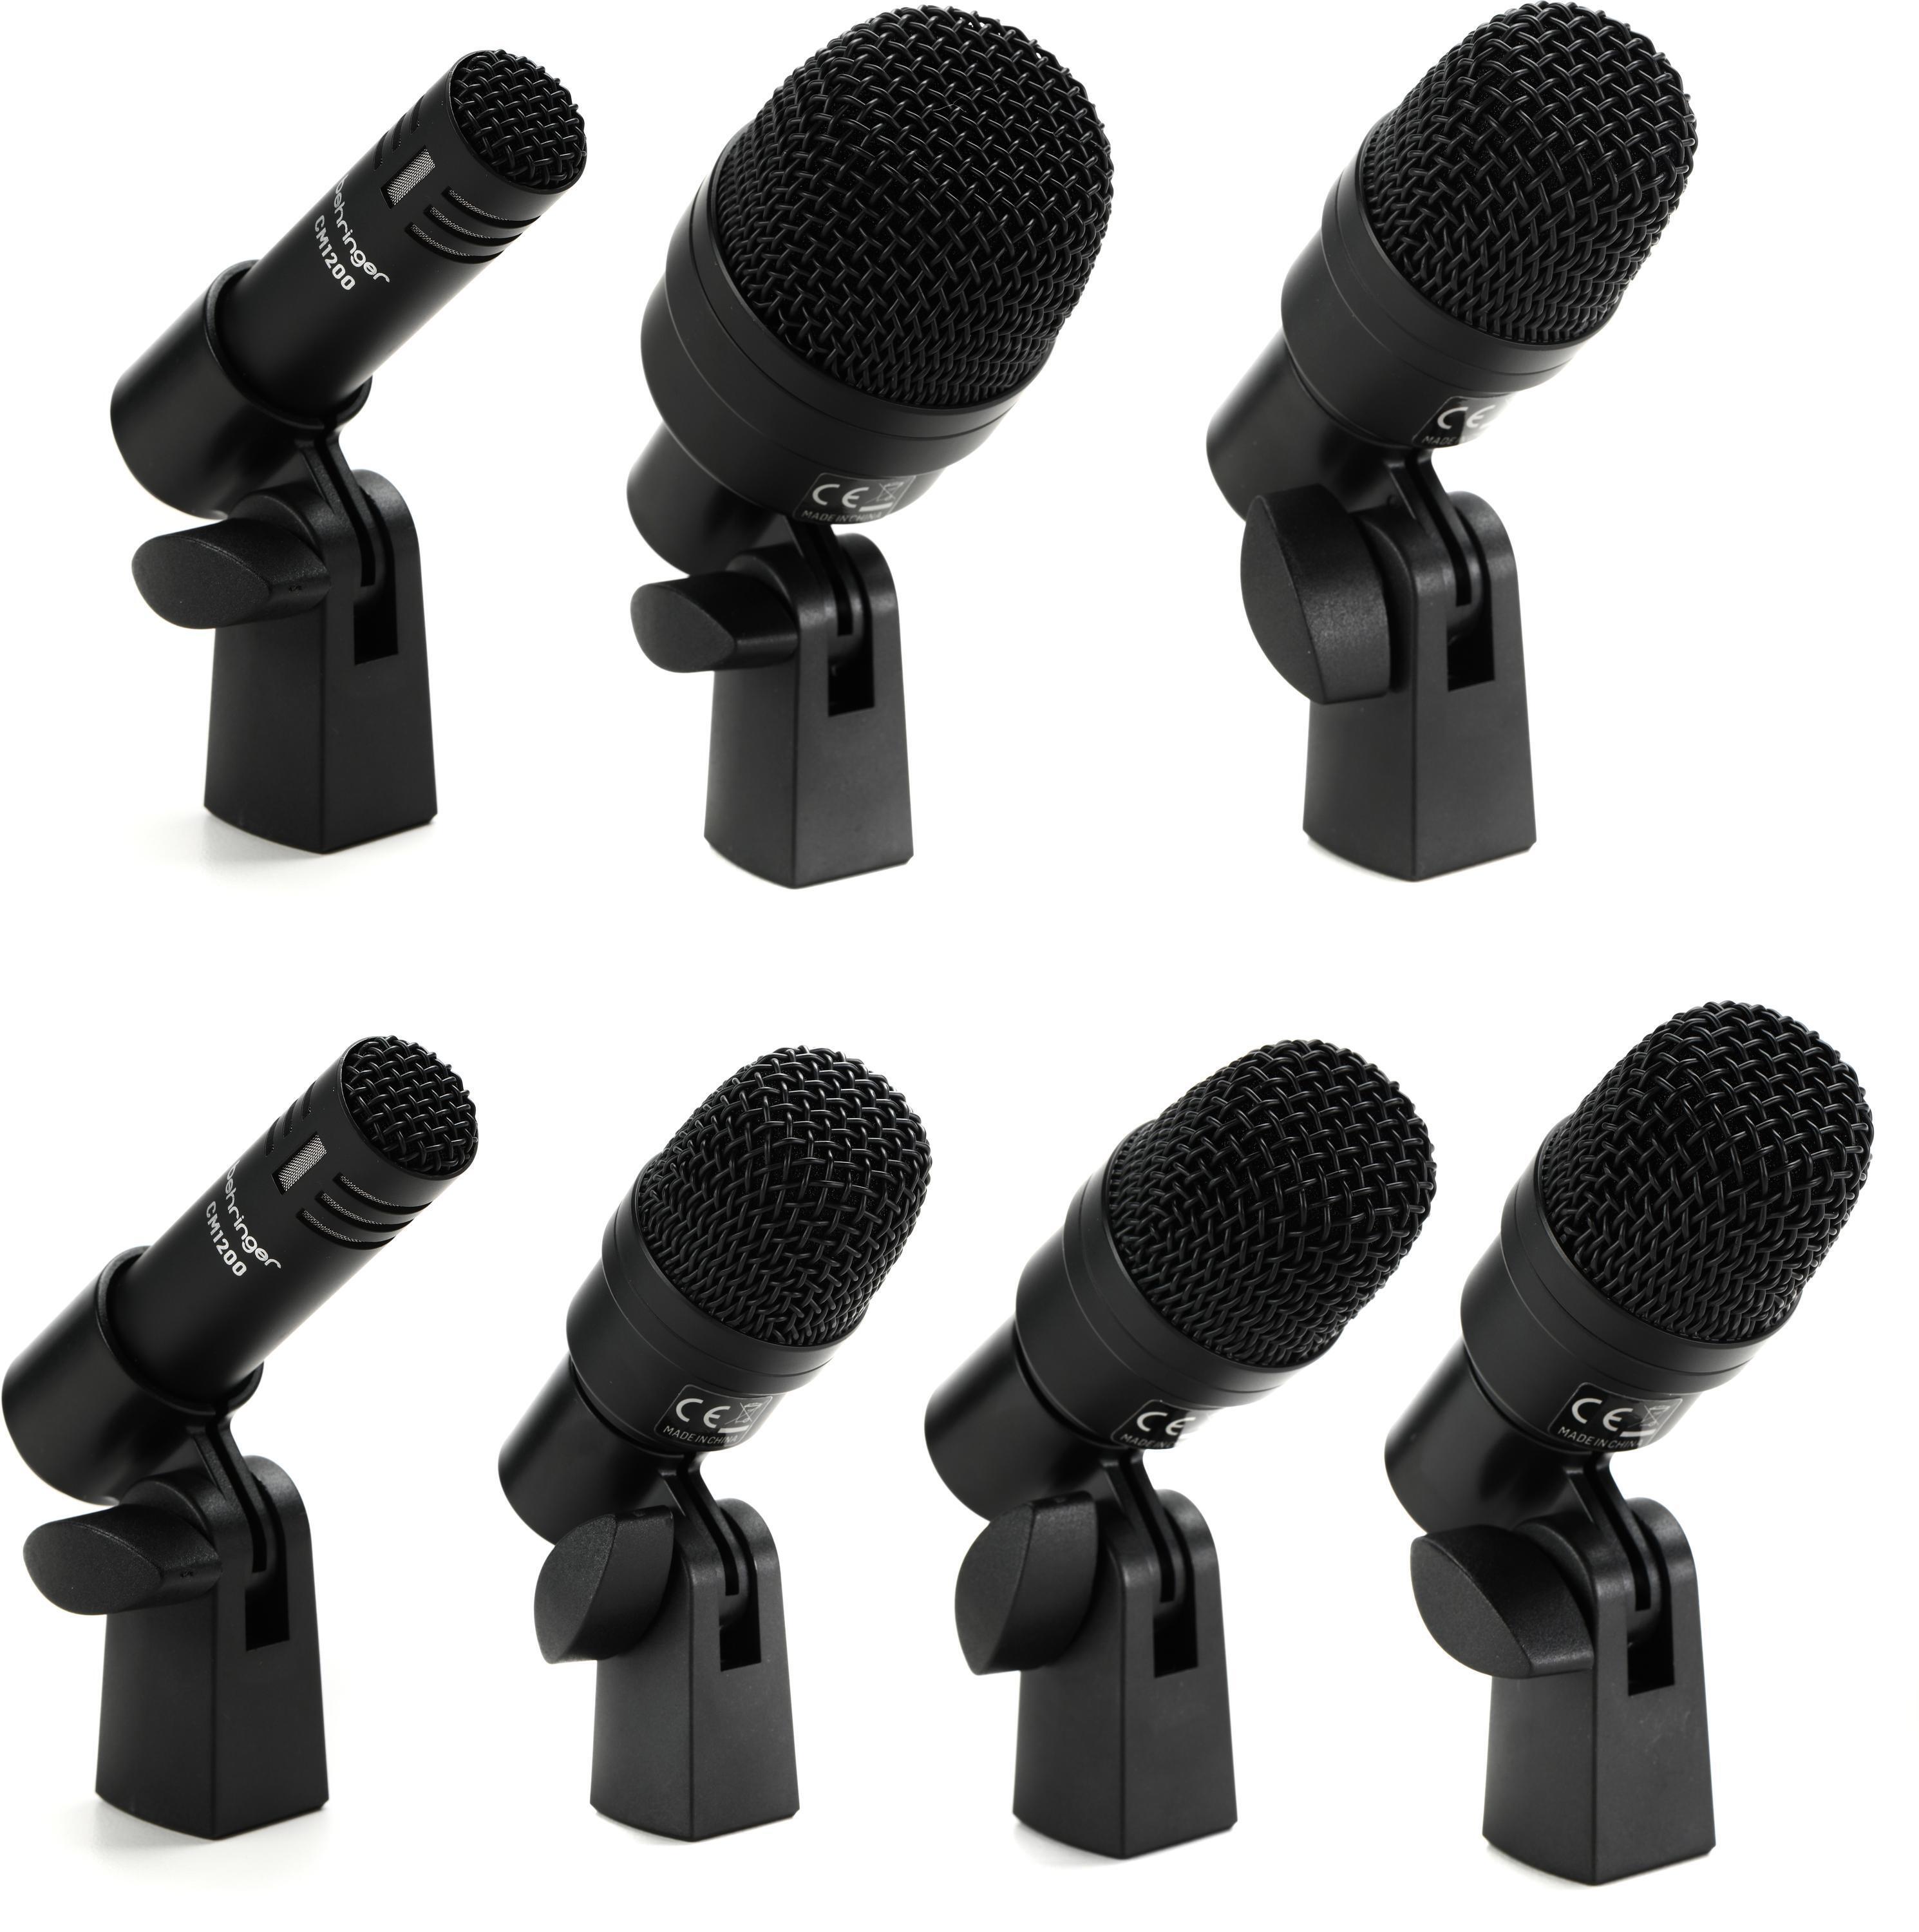 Wired Microphone Kit for Drum and Other Musical Instruments (Small Drum Mic)